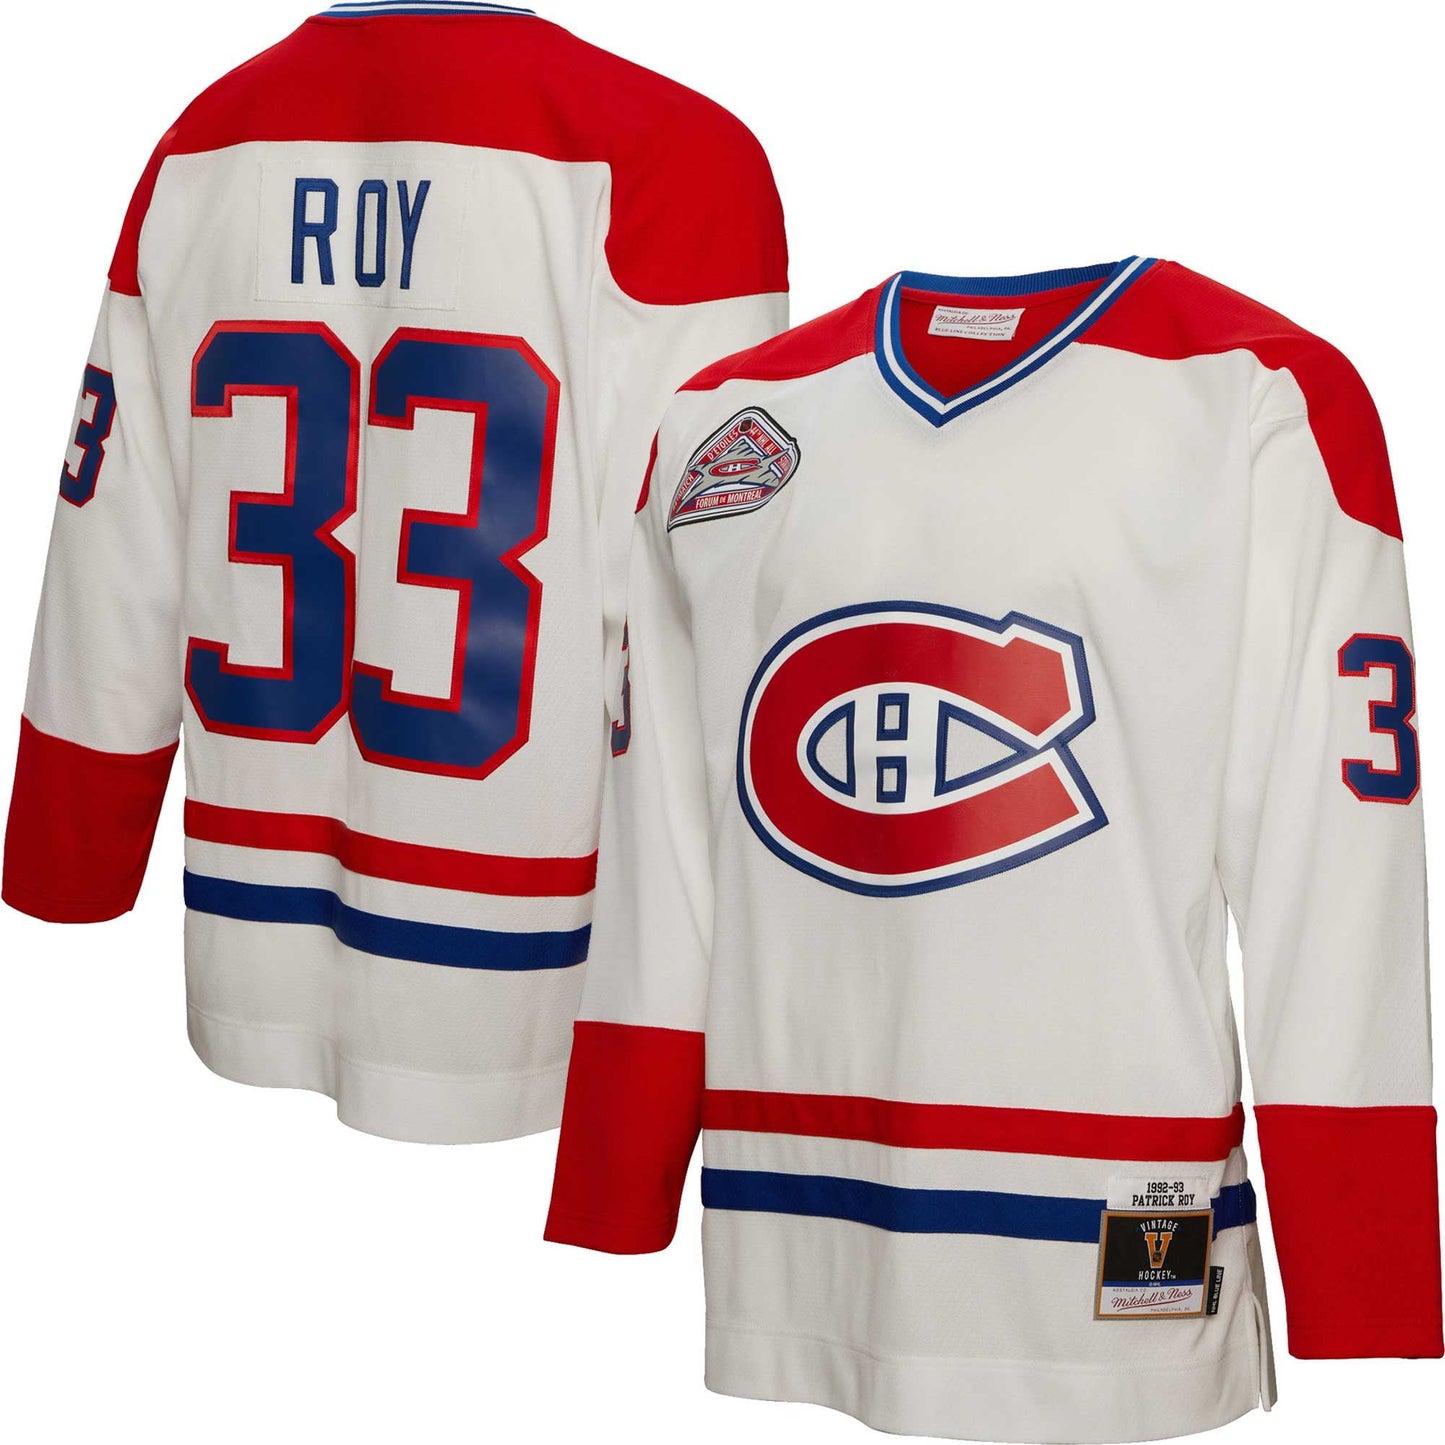 Men's Mitchell & Ness Patrick Roy White Montreal Canadiens  1992/93 Blue Line Player Jersey